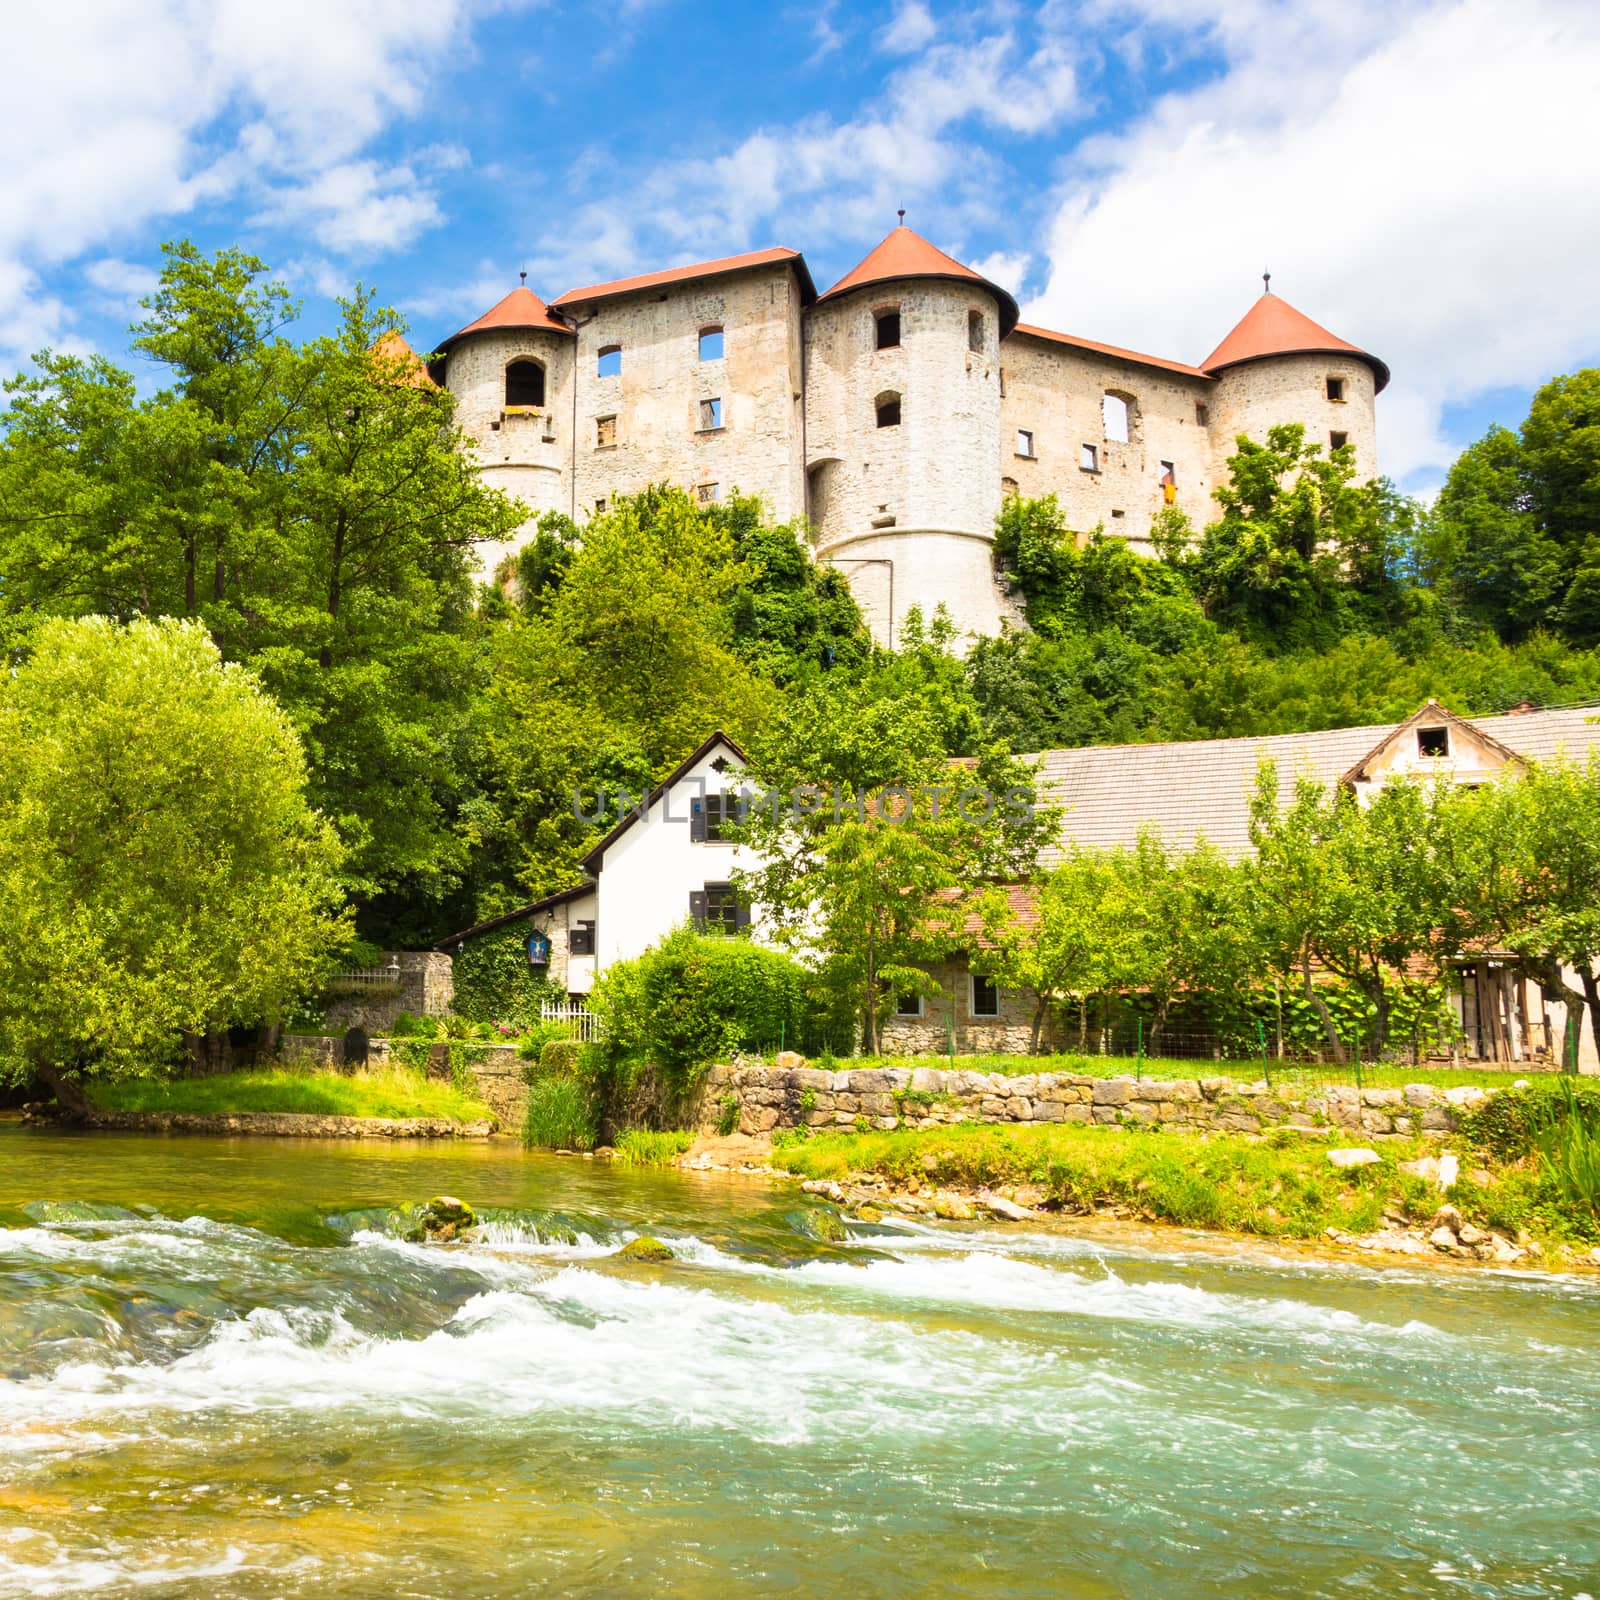 Zuzemberk castle, tourist destination in Slovenia. Zuzemberk is also a town and a municipality in the Dinaric Alps of Slovenia located south east of the Slovenian capital of Ljubljana.